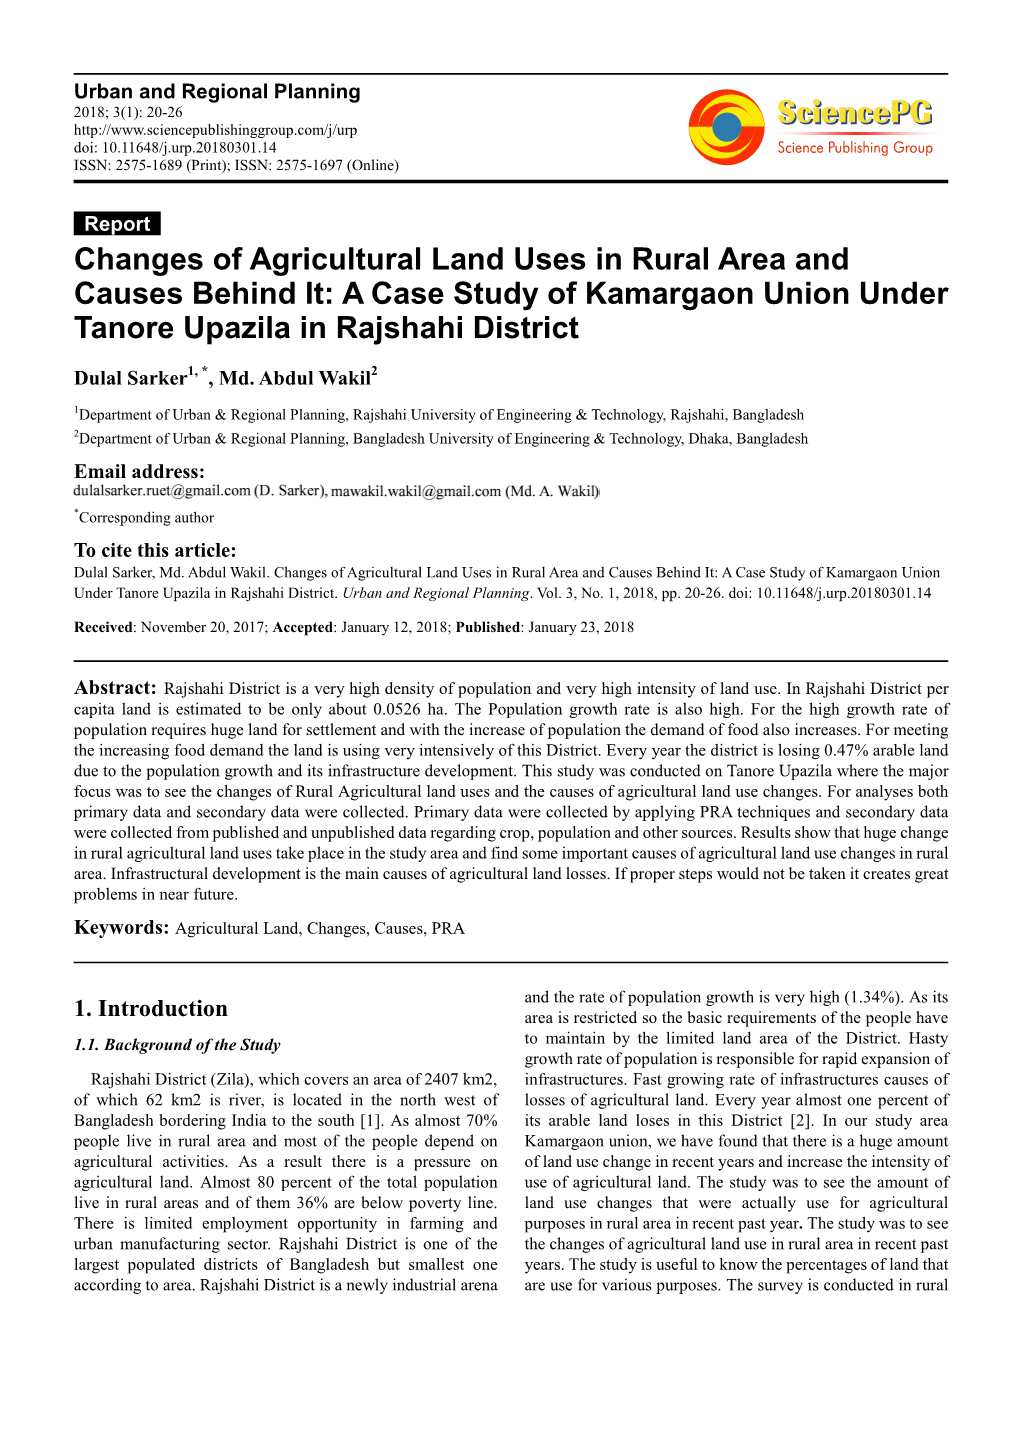 Changes of Agricultural Land Uses in Rural Area and Causes Behind It: a Case Study of Kamargaon Union Under Tanore Upazila in Rajshahi District